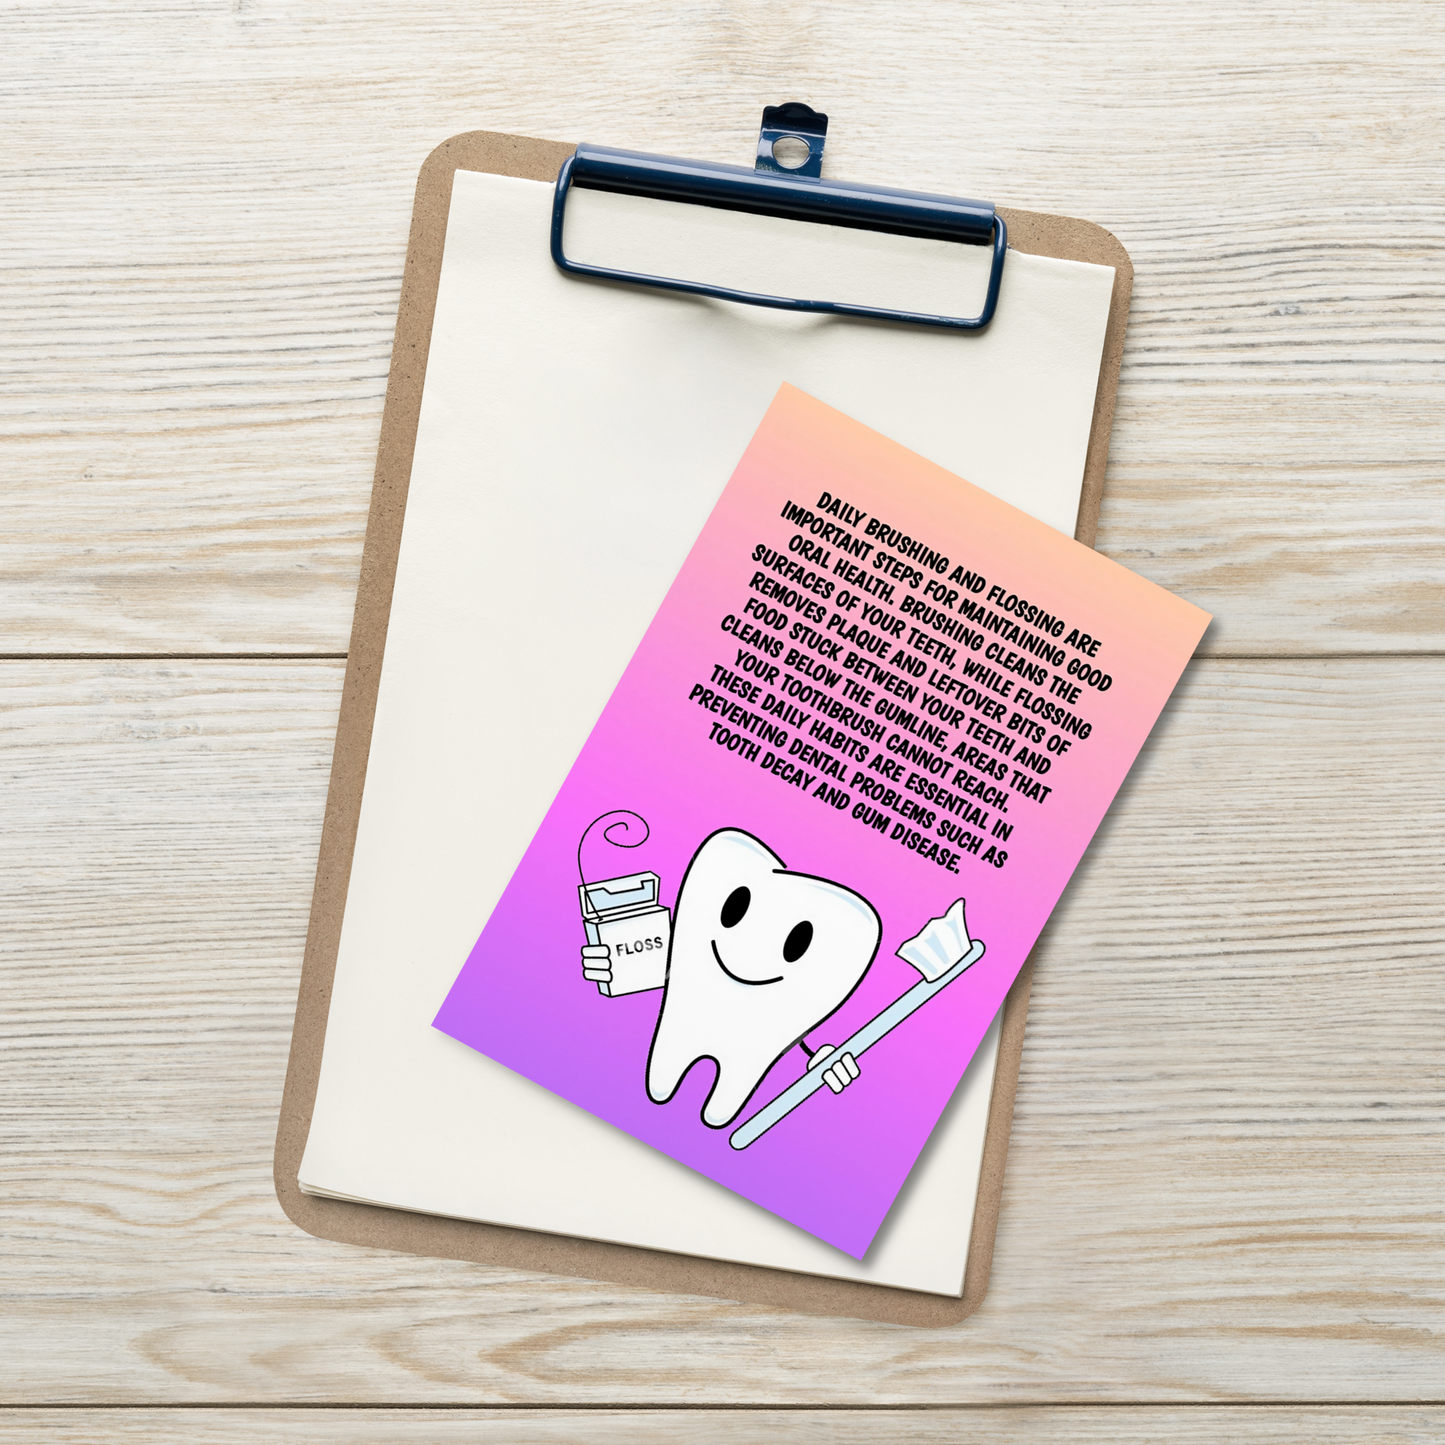 Oral Hygiene Cards- Daily Brushing And Flossing Are Important Steps For Maintaining Good Oral Health